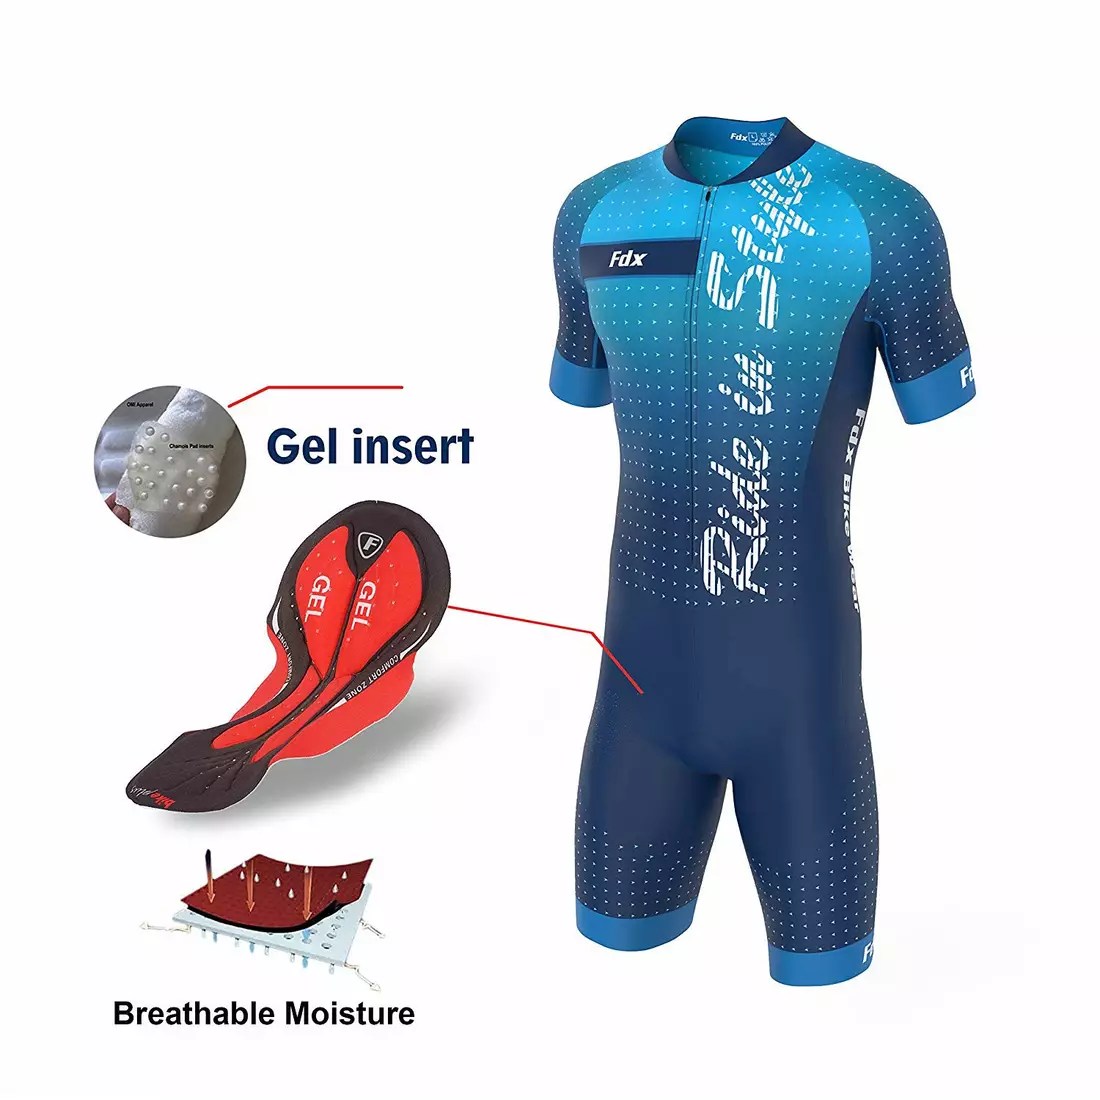 FDX 1290 one-piece cycling suit blue